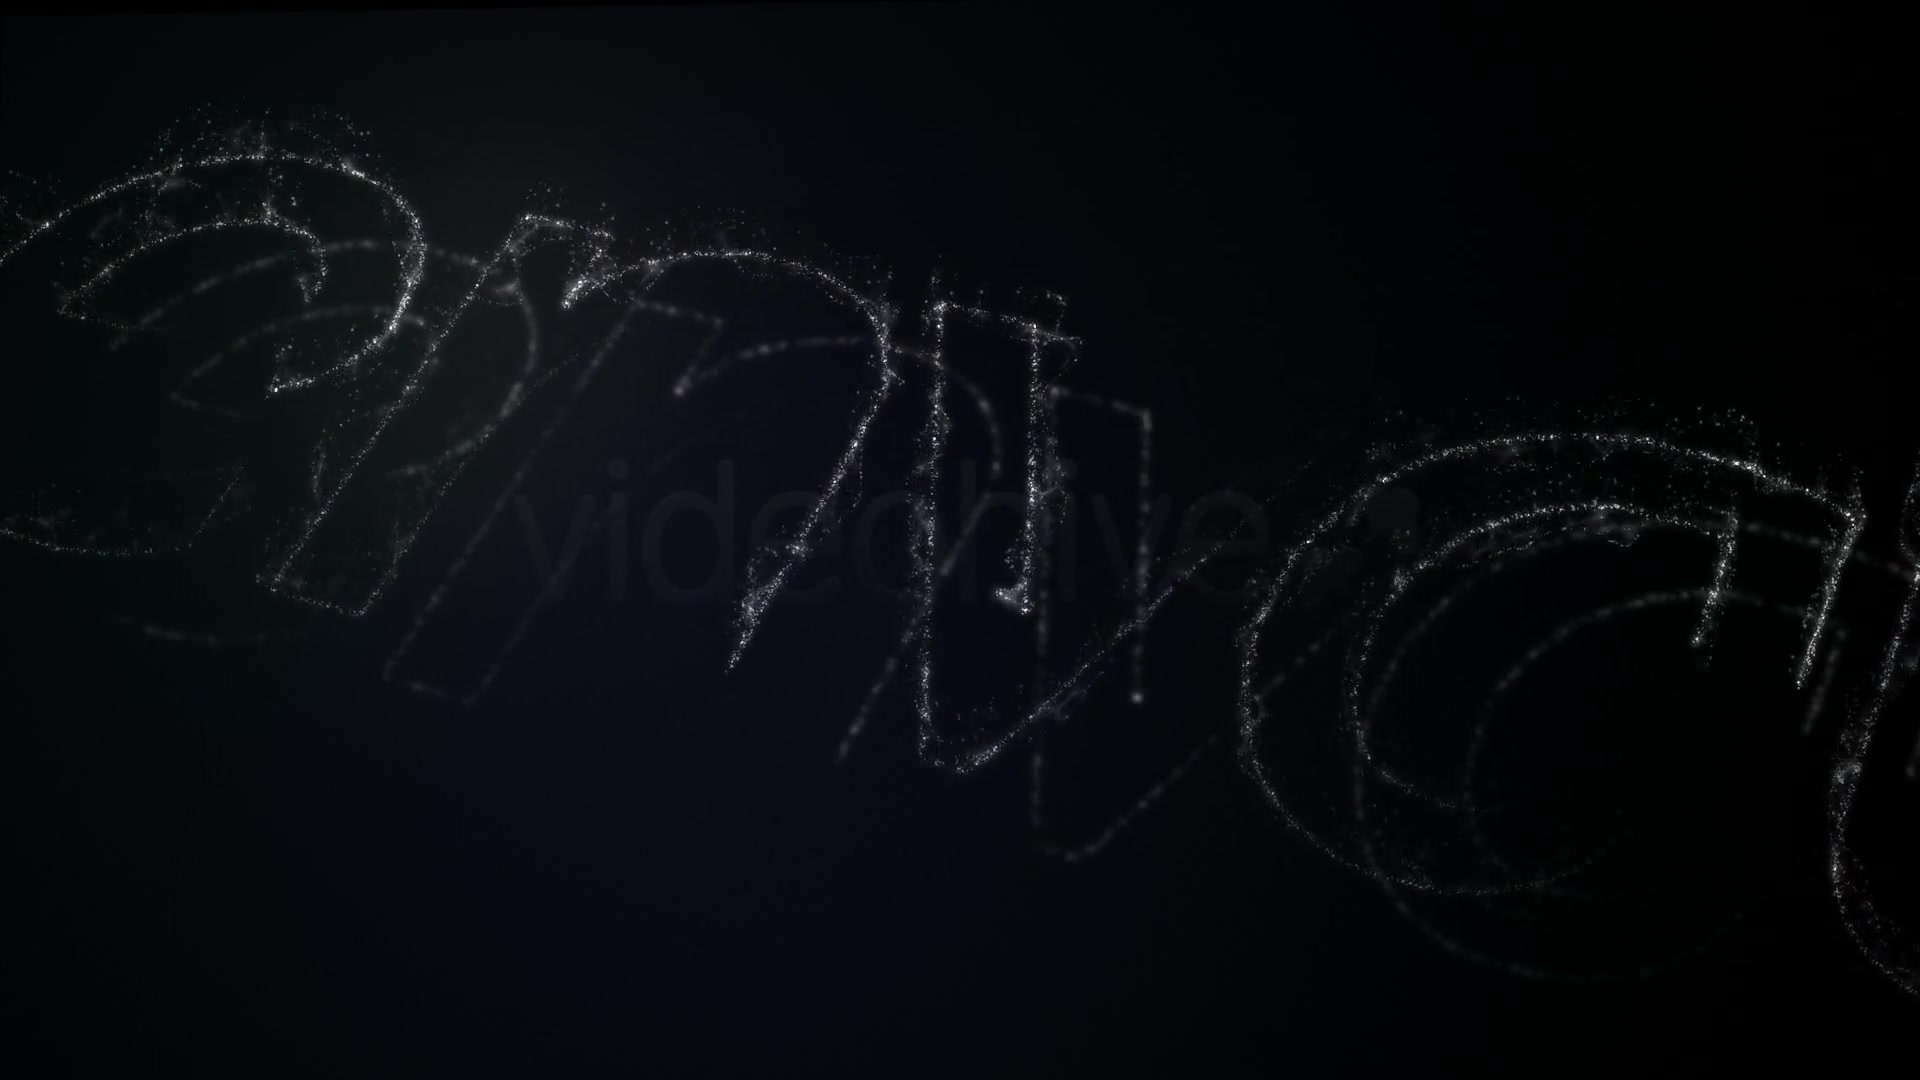 Particular line Logo Reveal - Download Videohive 4440918